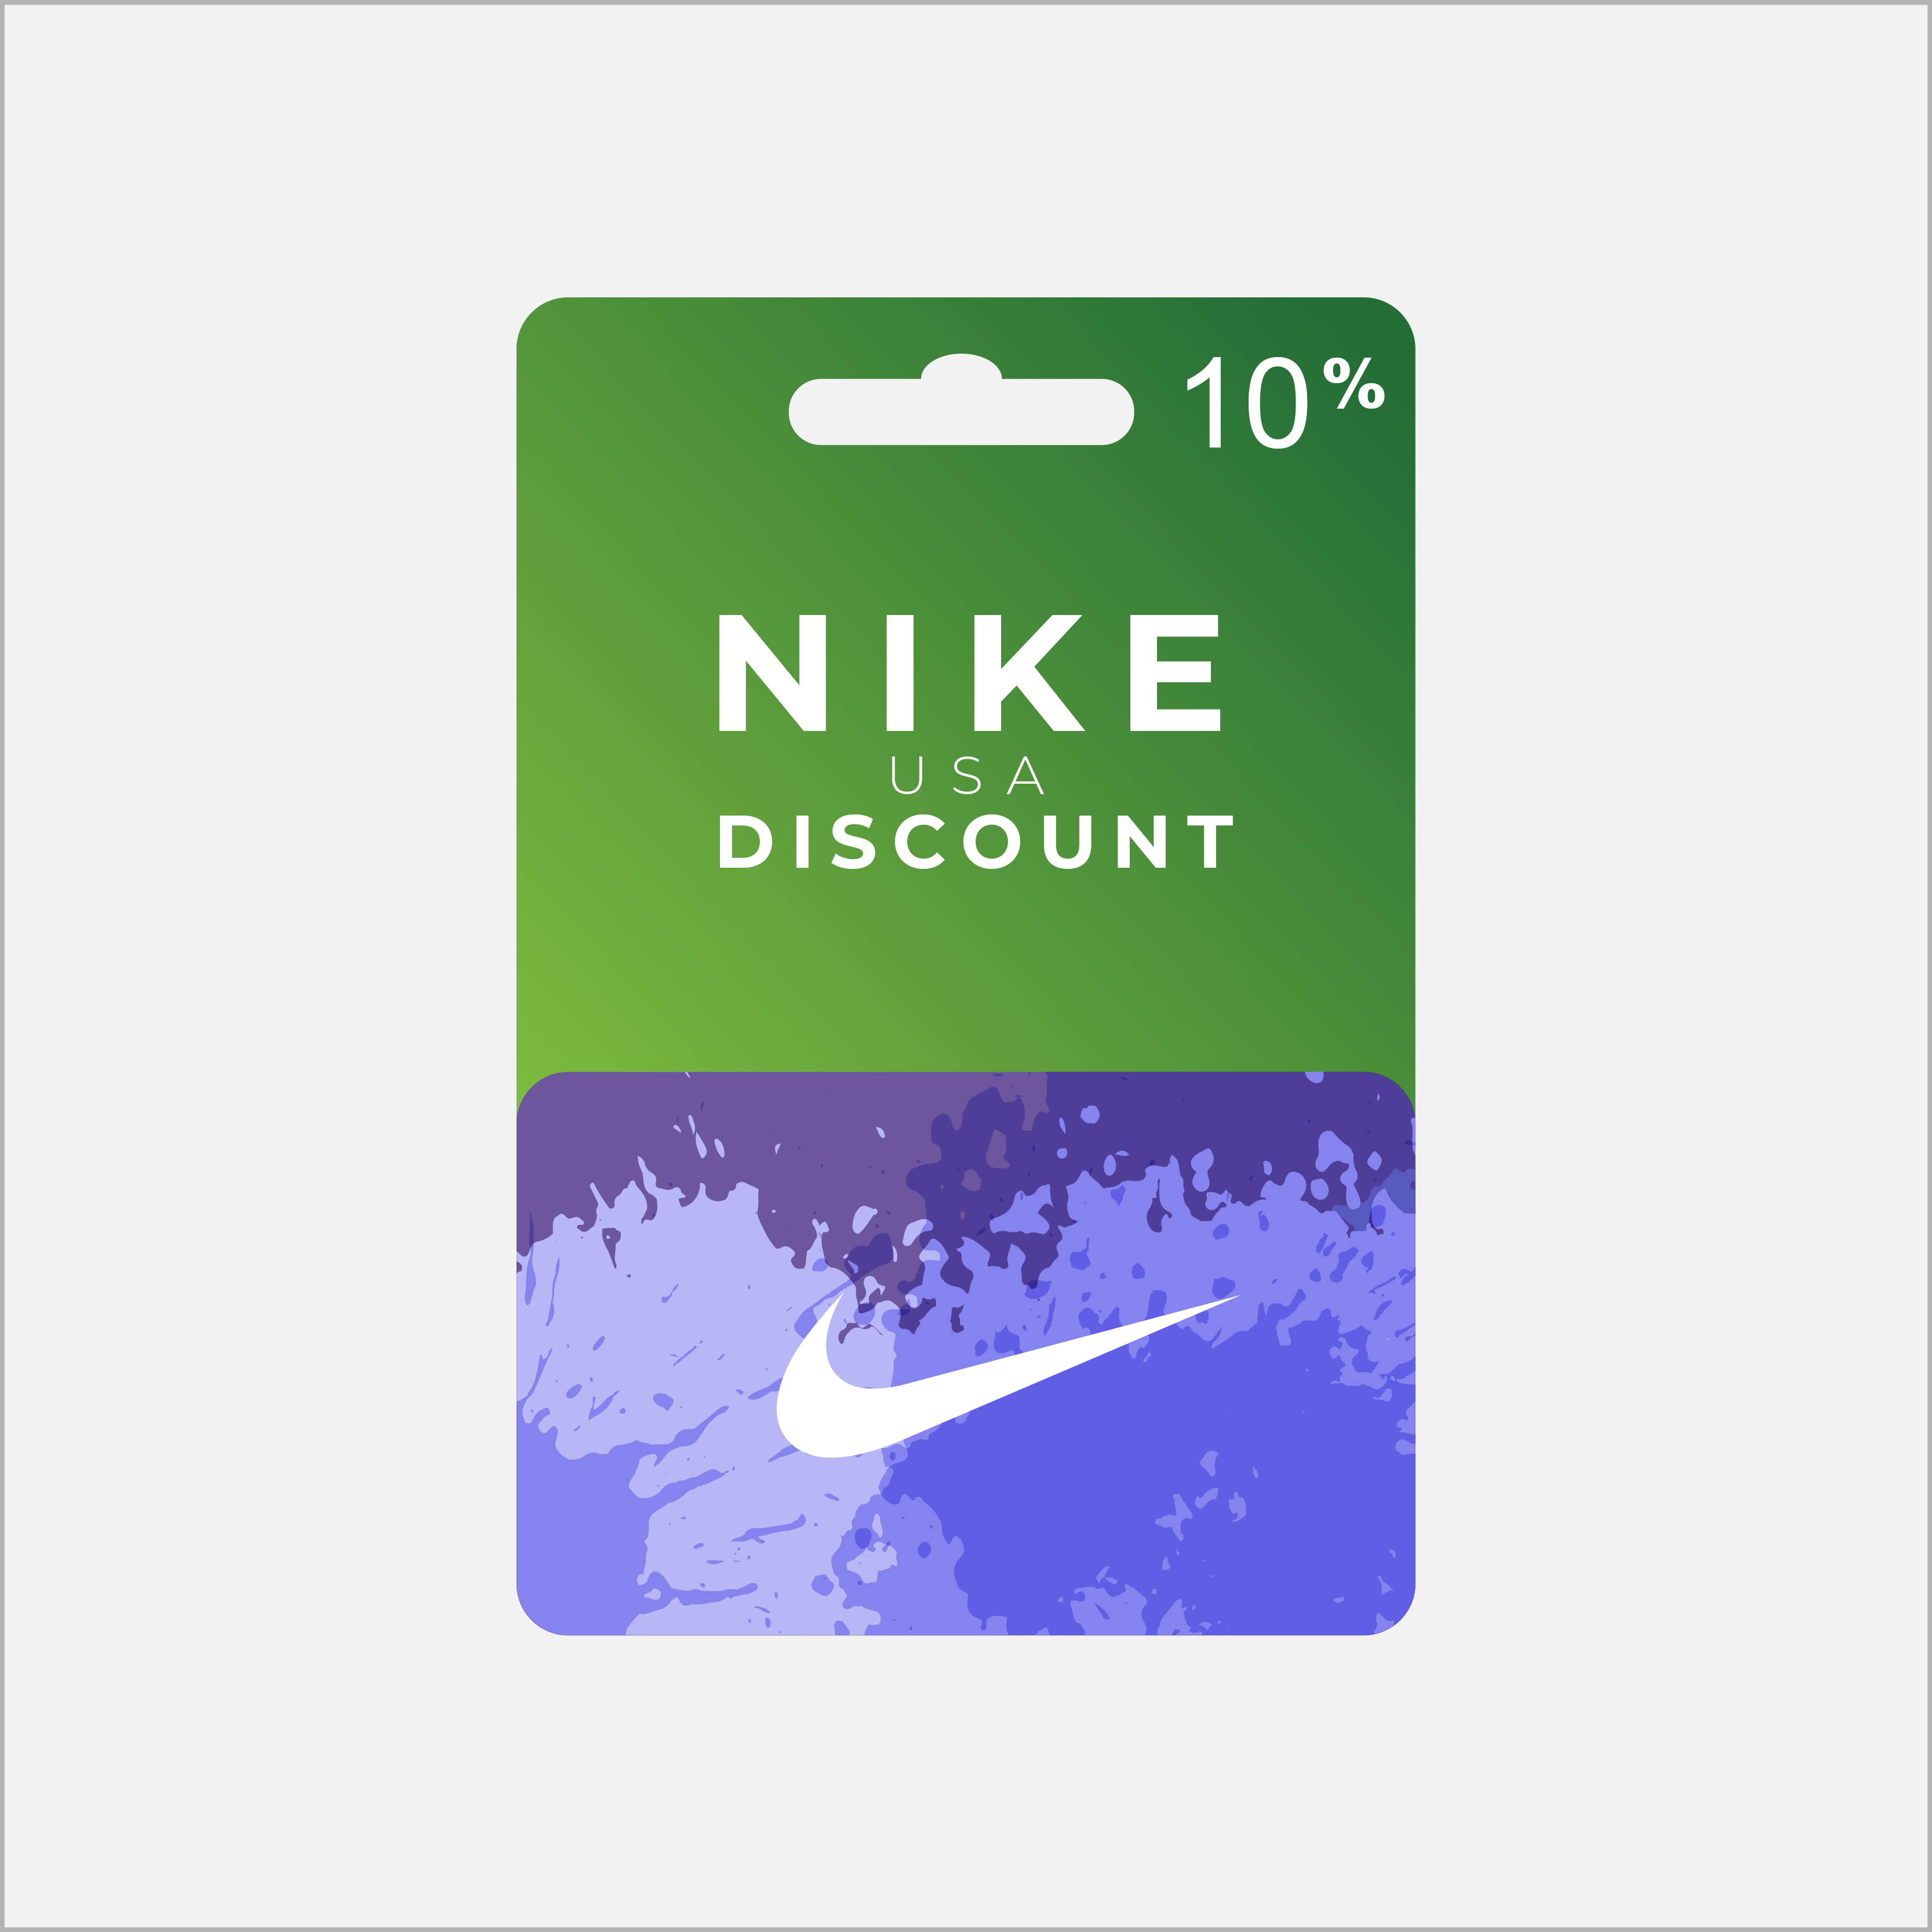 nike discount coses